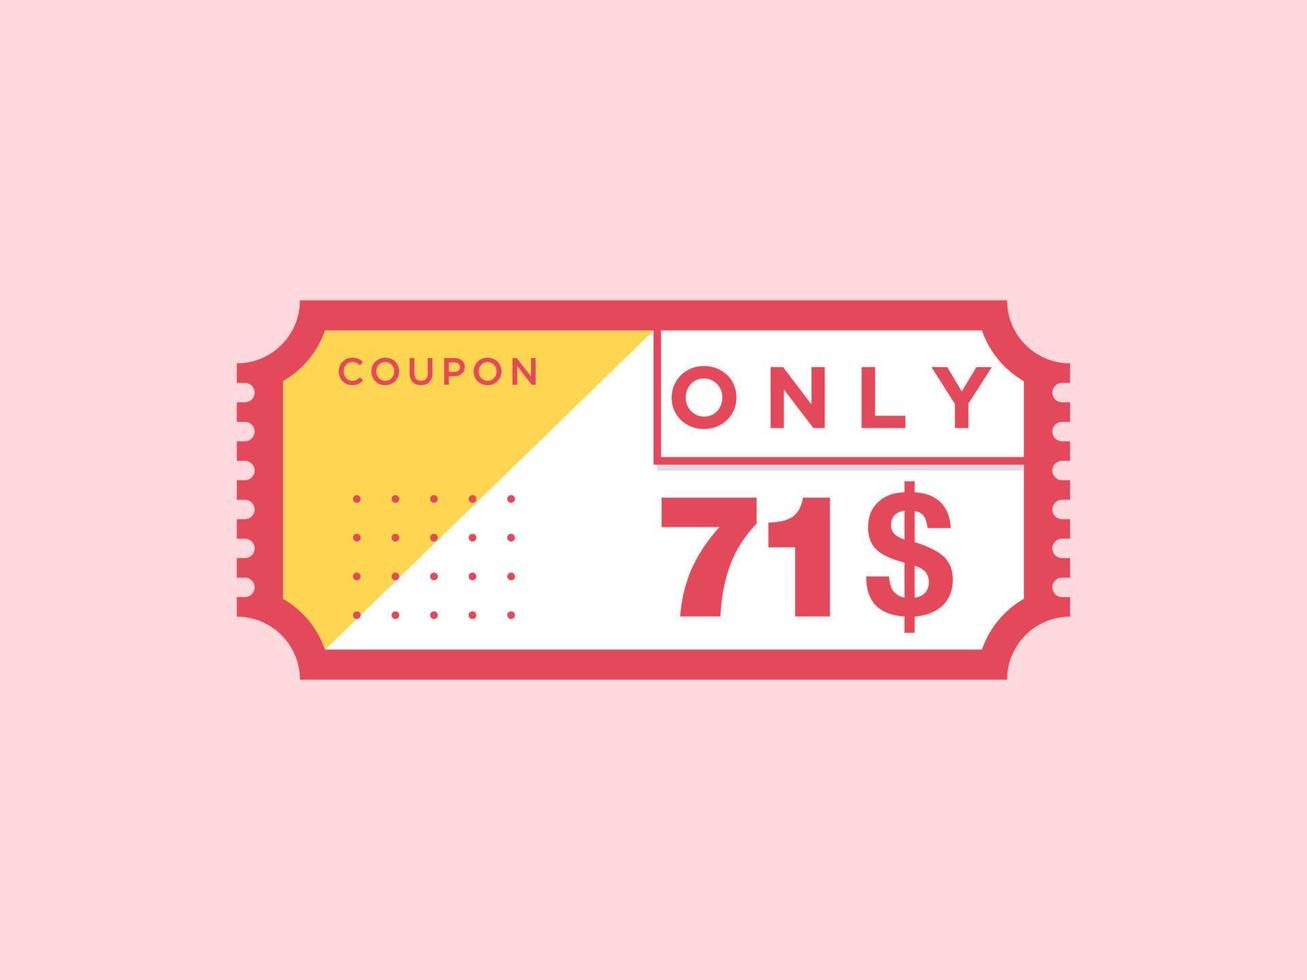 71 Dollar Only Coupon sign or Label or discount voucher Money Saving label, with coupon vector illustration summer offer ends weekend holiday